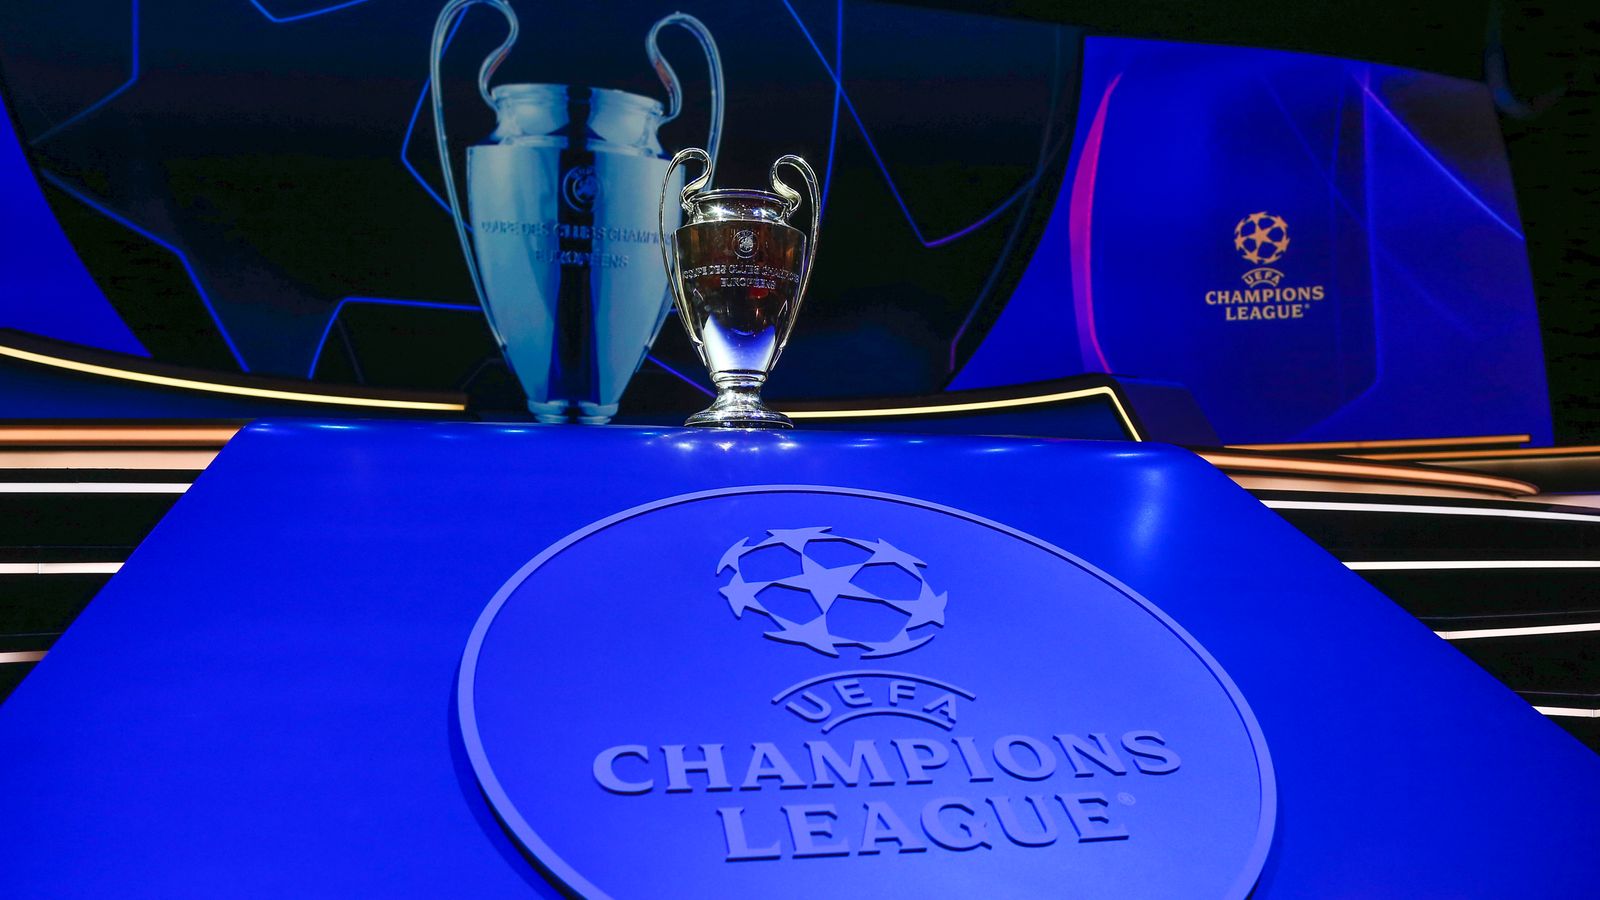 champions-league-liverpool-tottenham-chelsea-man-city-celtic-and-amp-rangers-state-of-play